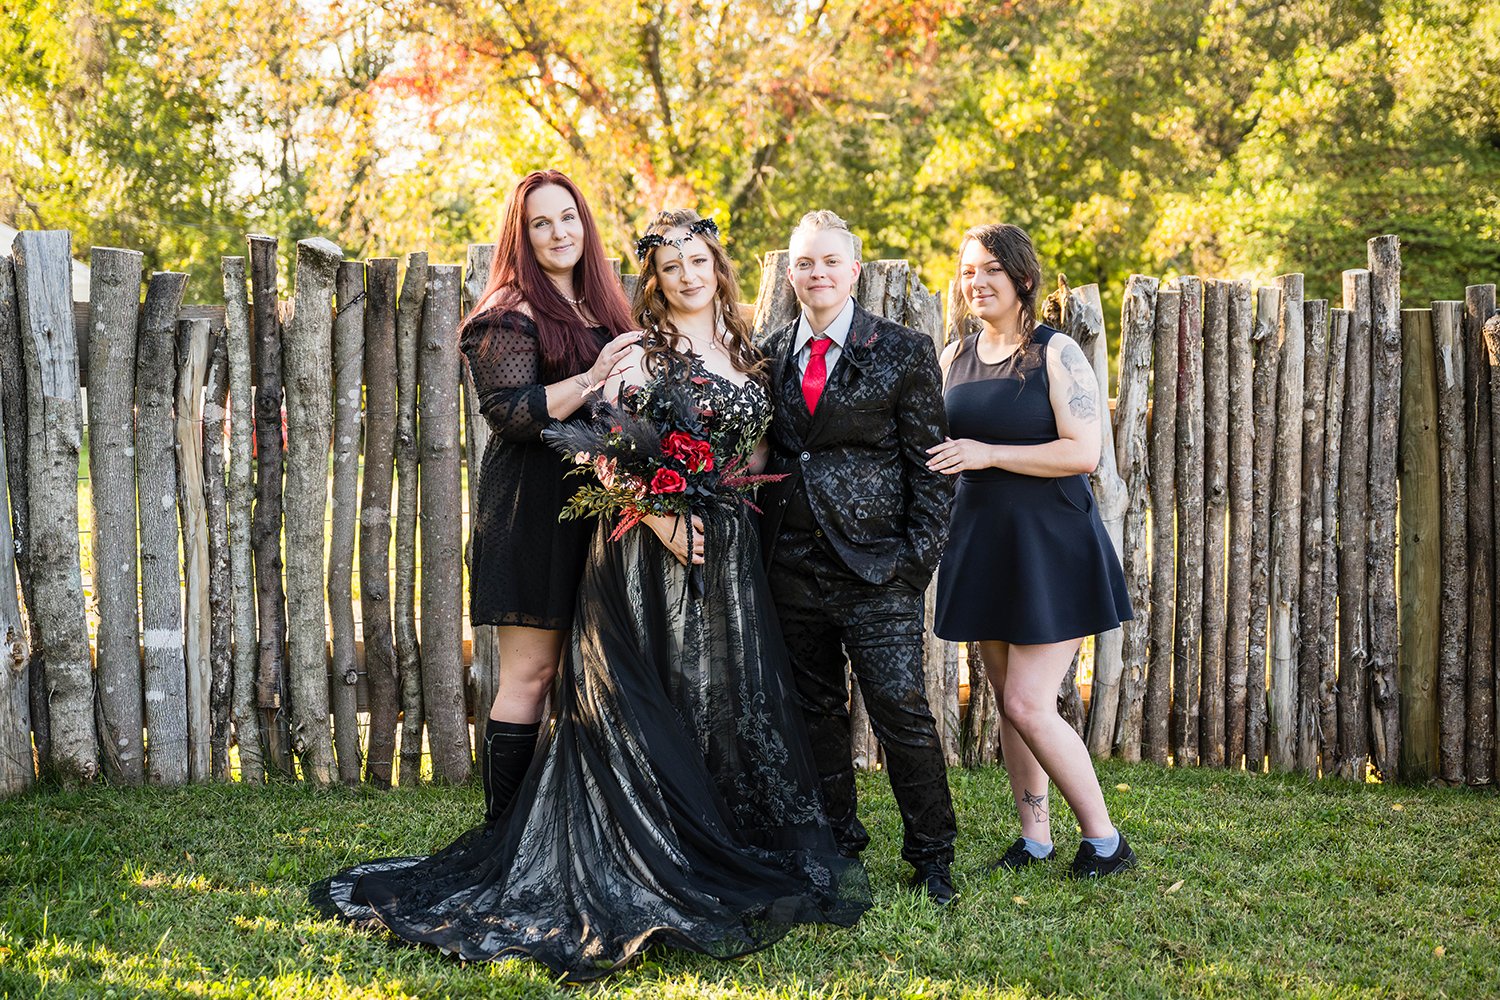 A newlywed couple dressed in black stand outside in the backyard of their Airbnb with their wedding party for a photo.